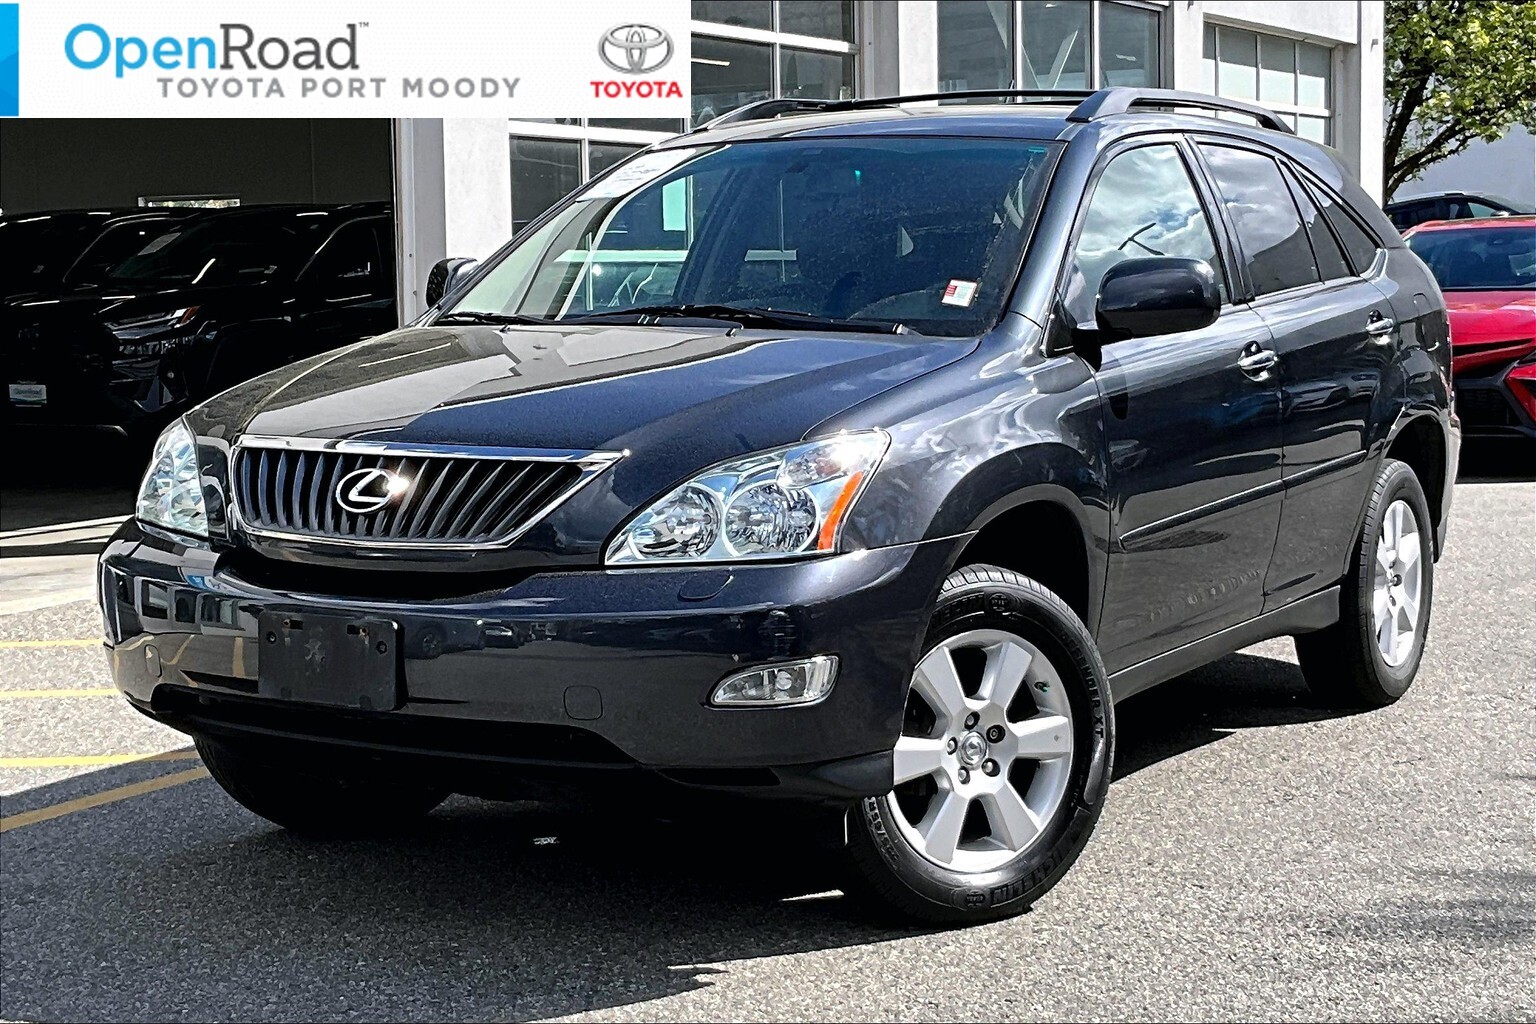 2009 Lexus RX 350 Luxury SUV 5A |OpenRoad True Price |Local |One Own